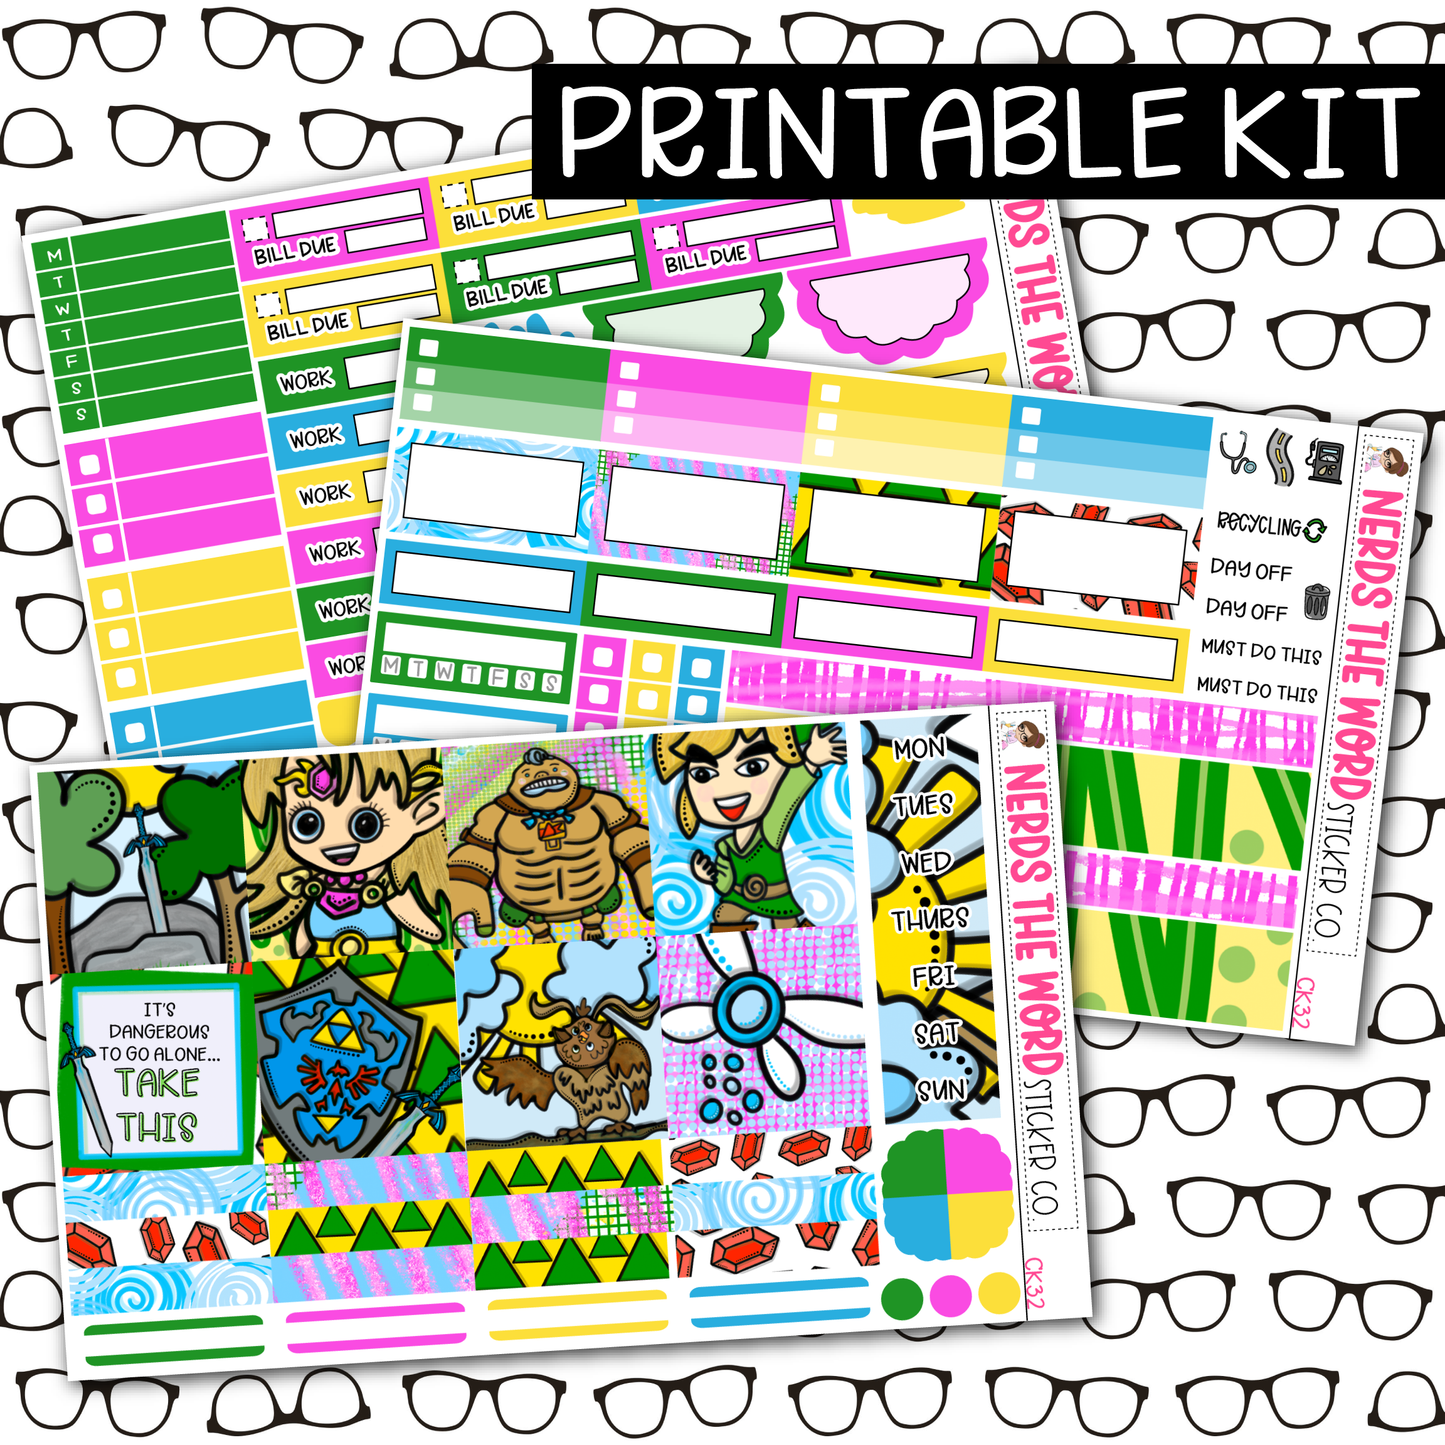 PRINTABLE Link Weekly Kit - Choose your Size